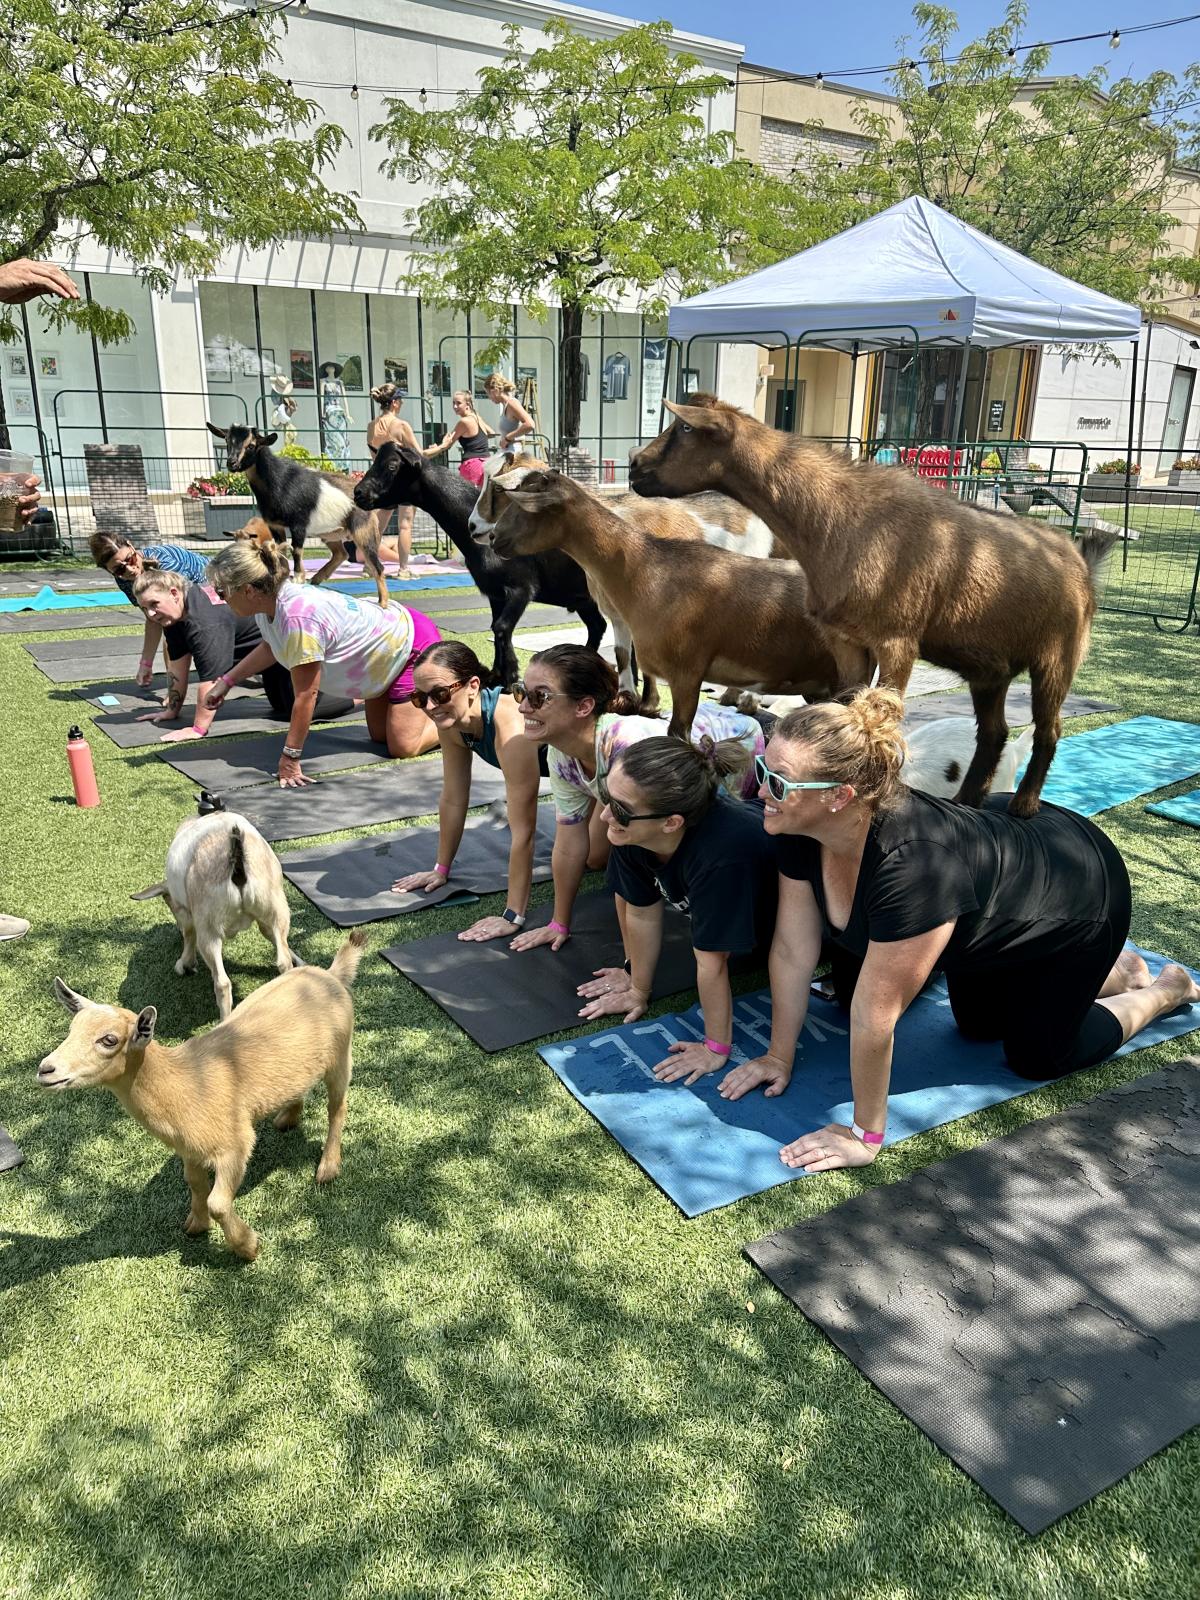 Where to Find Free Outdoor Yoga Classes in Northern Virginia